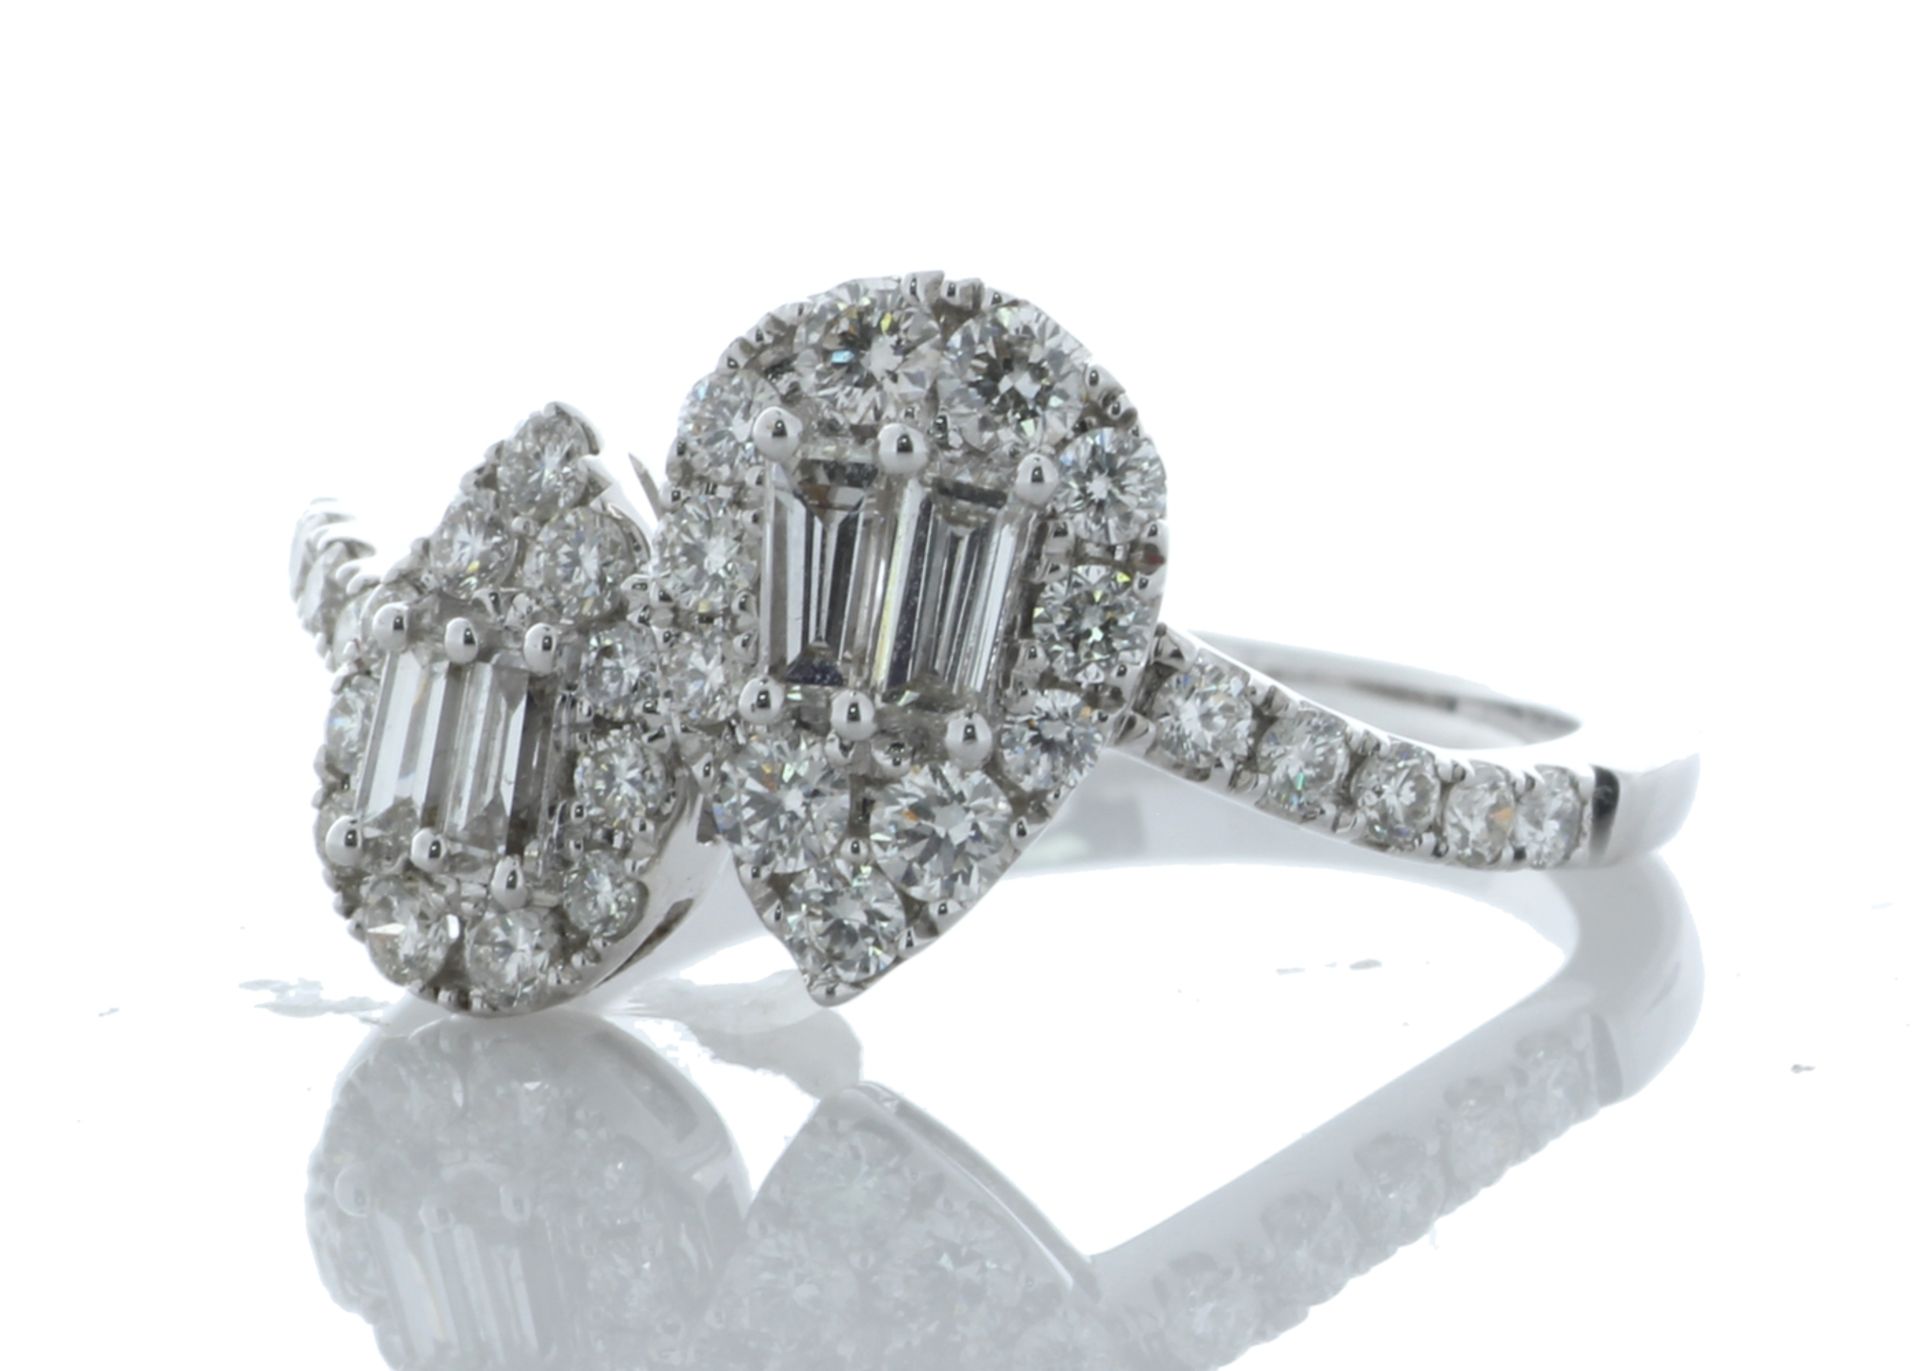 18ct White Gold Double Pear Shape Cluster Diamond Ring 0.83 Carats - Valued by IDI £4,995.00 - - Image 2 of 5